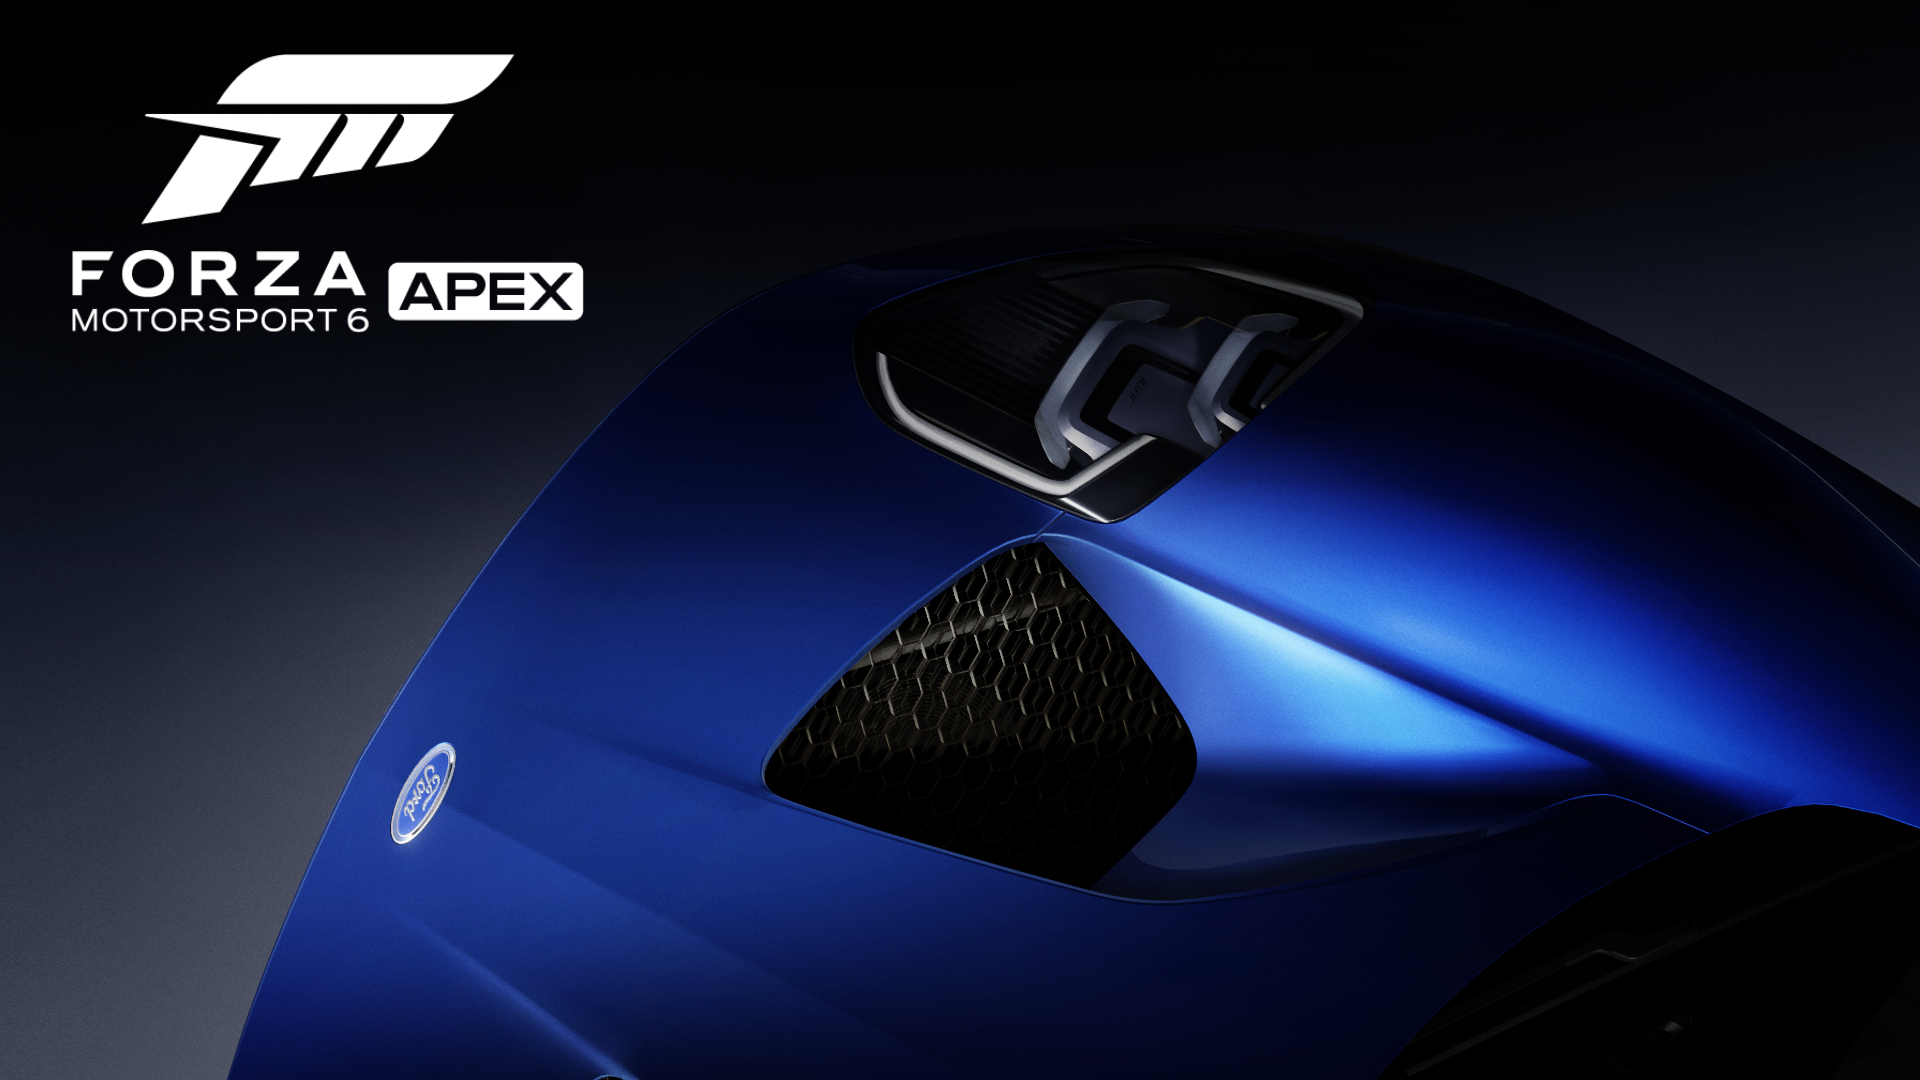 Forza Motorsport 6: Apex is coming to PC for free